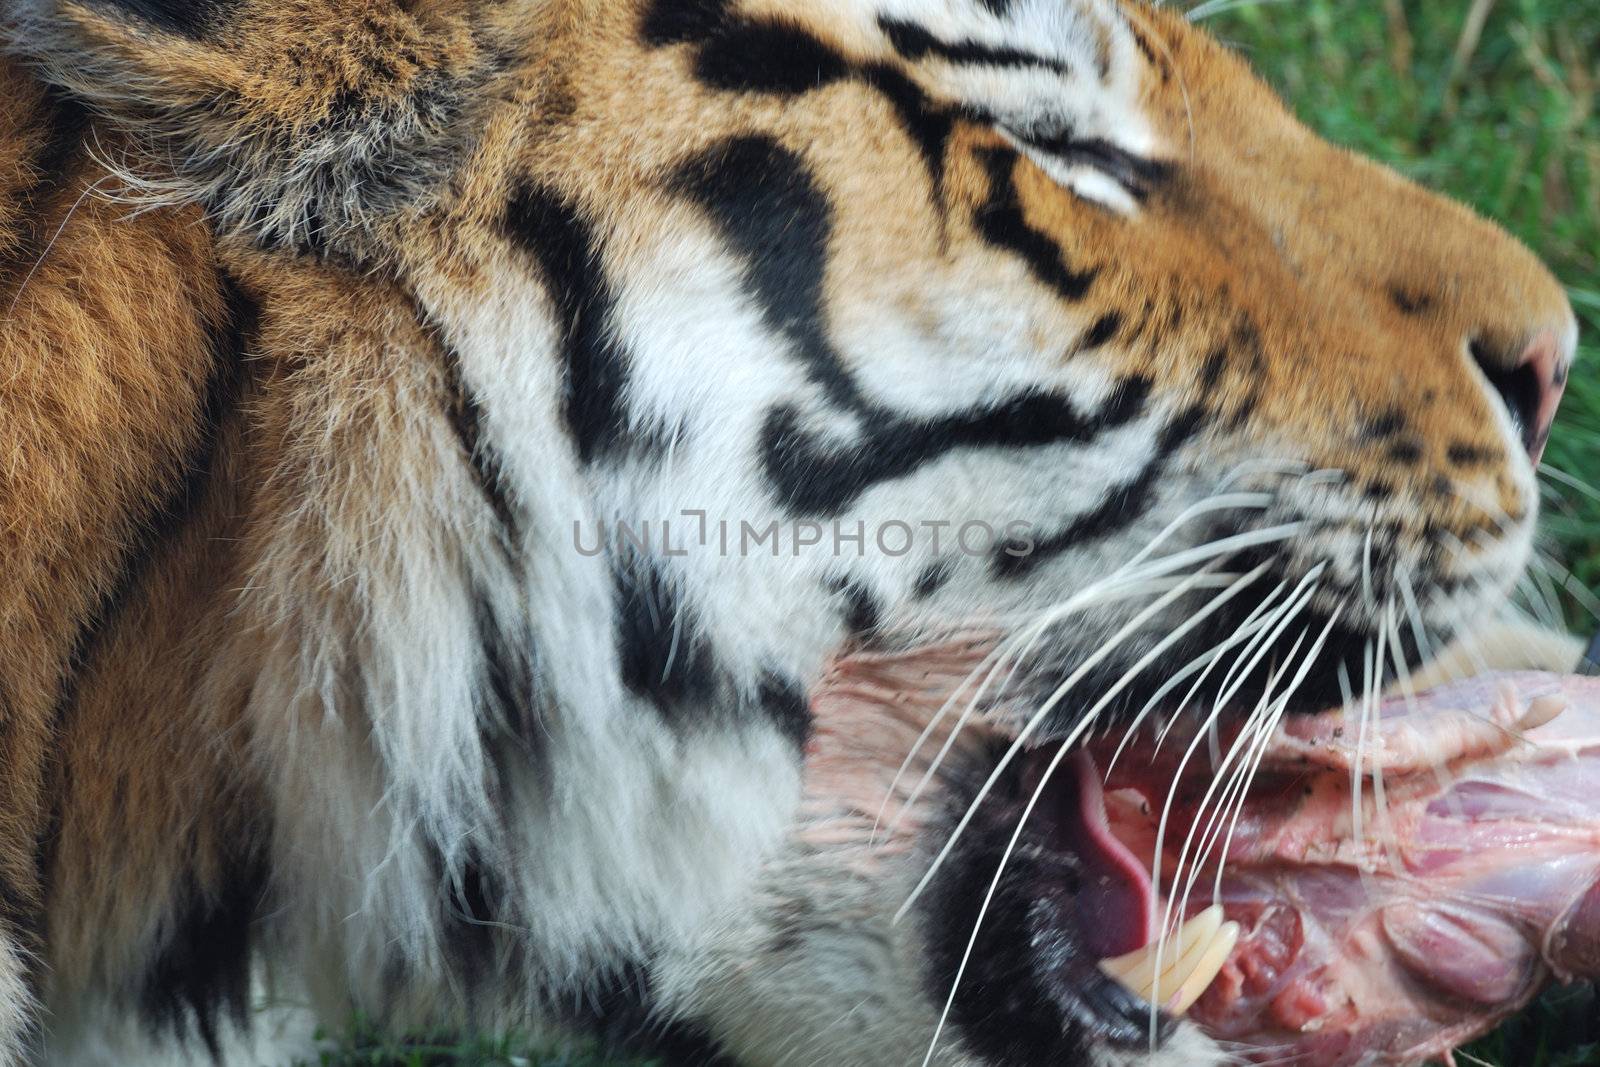 Amur Tiger in close up eating